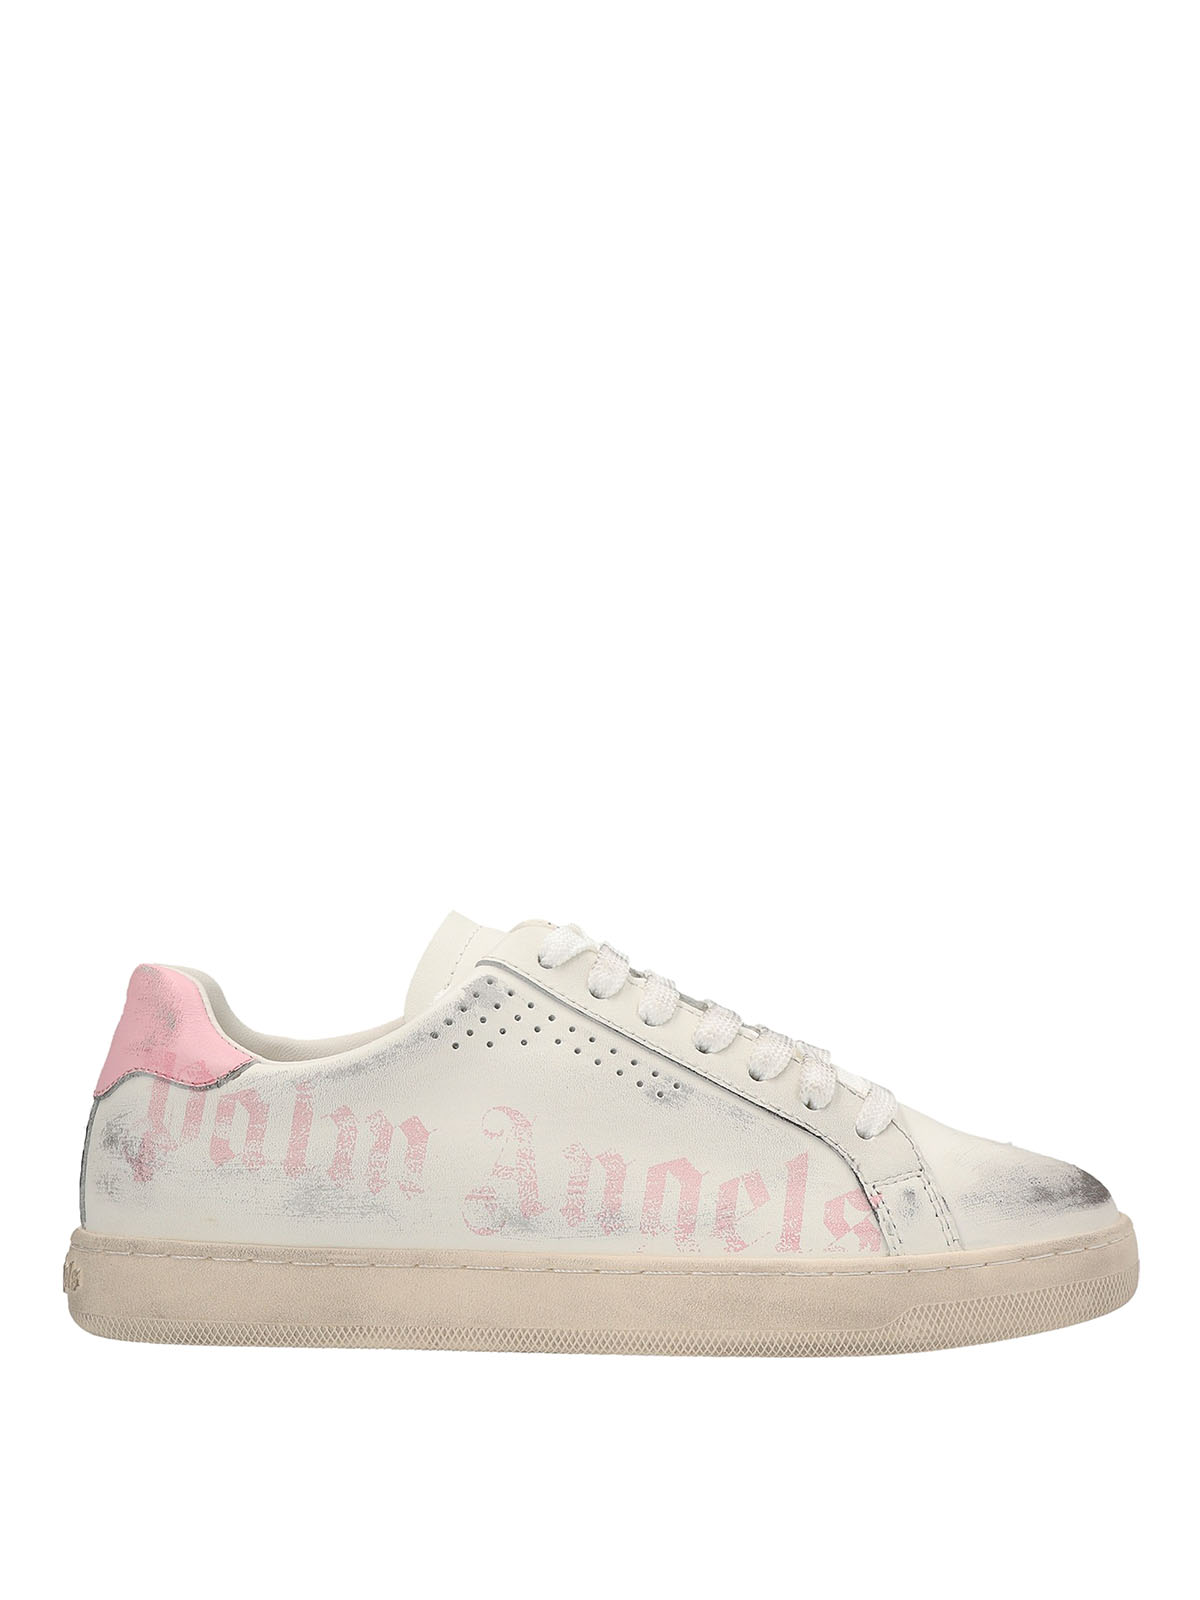 PALM ANGELS VT LOGO PALM 1 SNEAKERS